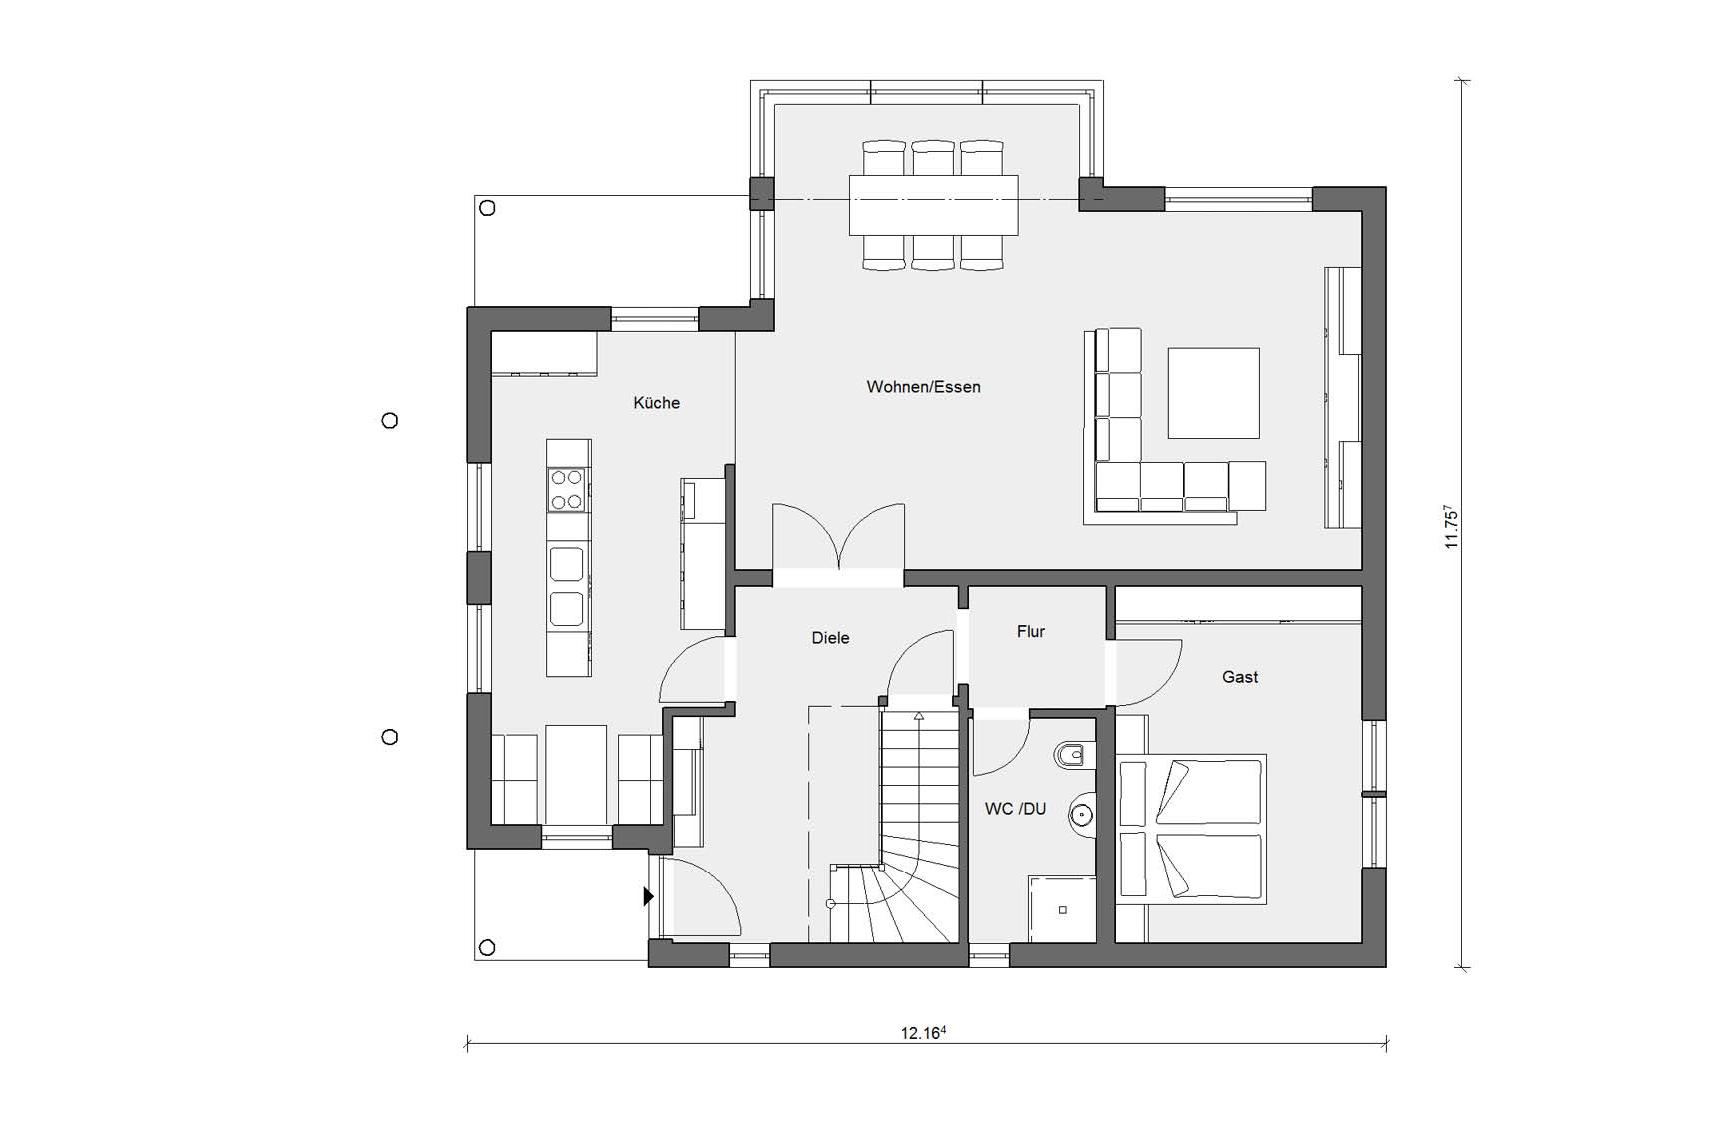 Ground floor plan E 15-205.1 House with conservatory